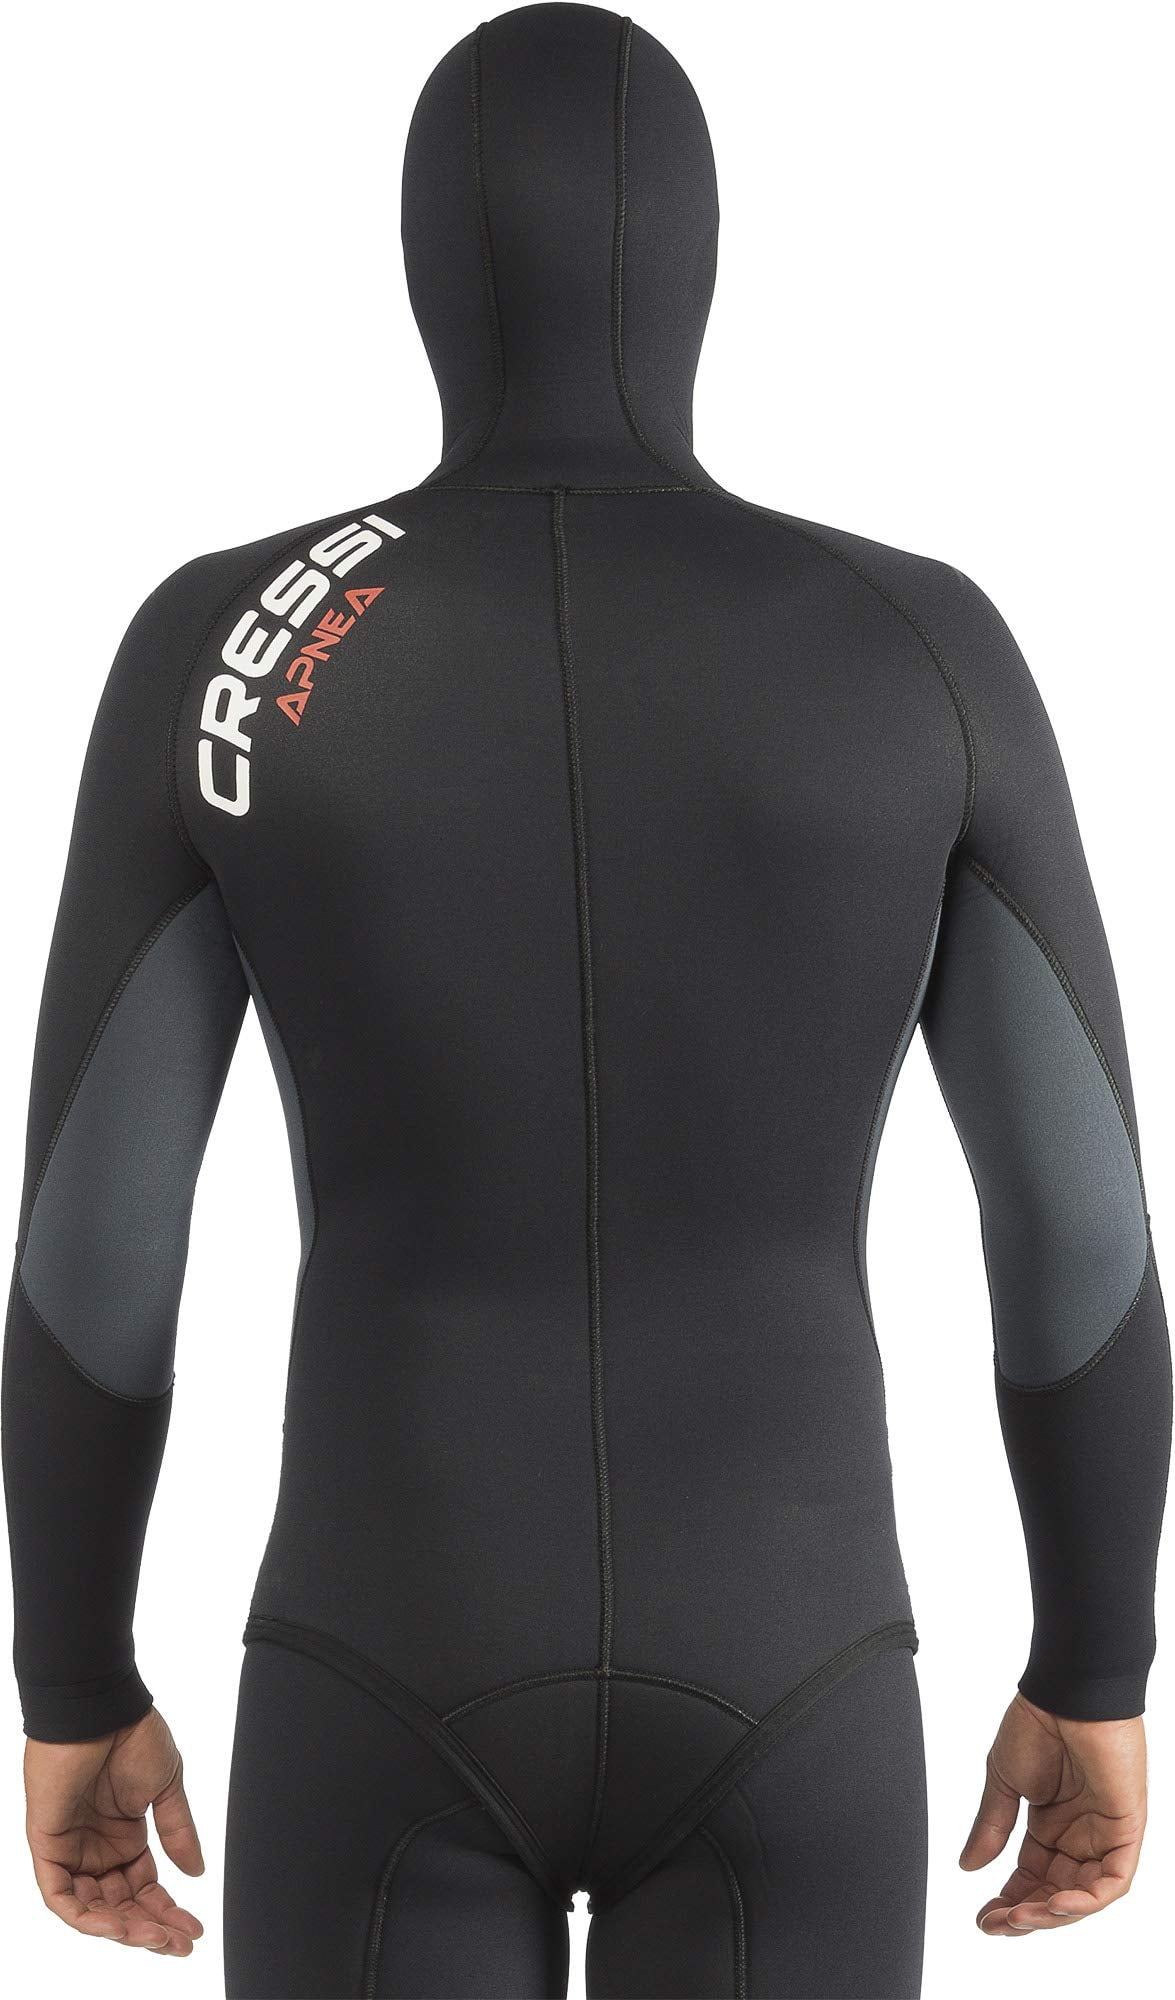 Summer one piece base layer undersuit bodysuit from extreme racing 